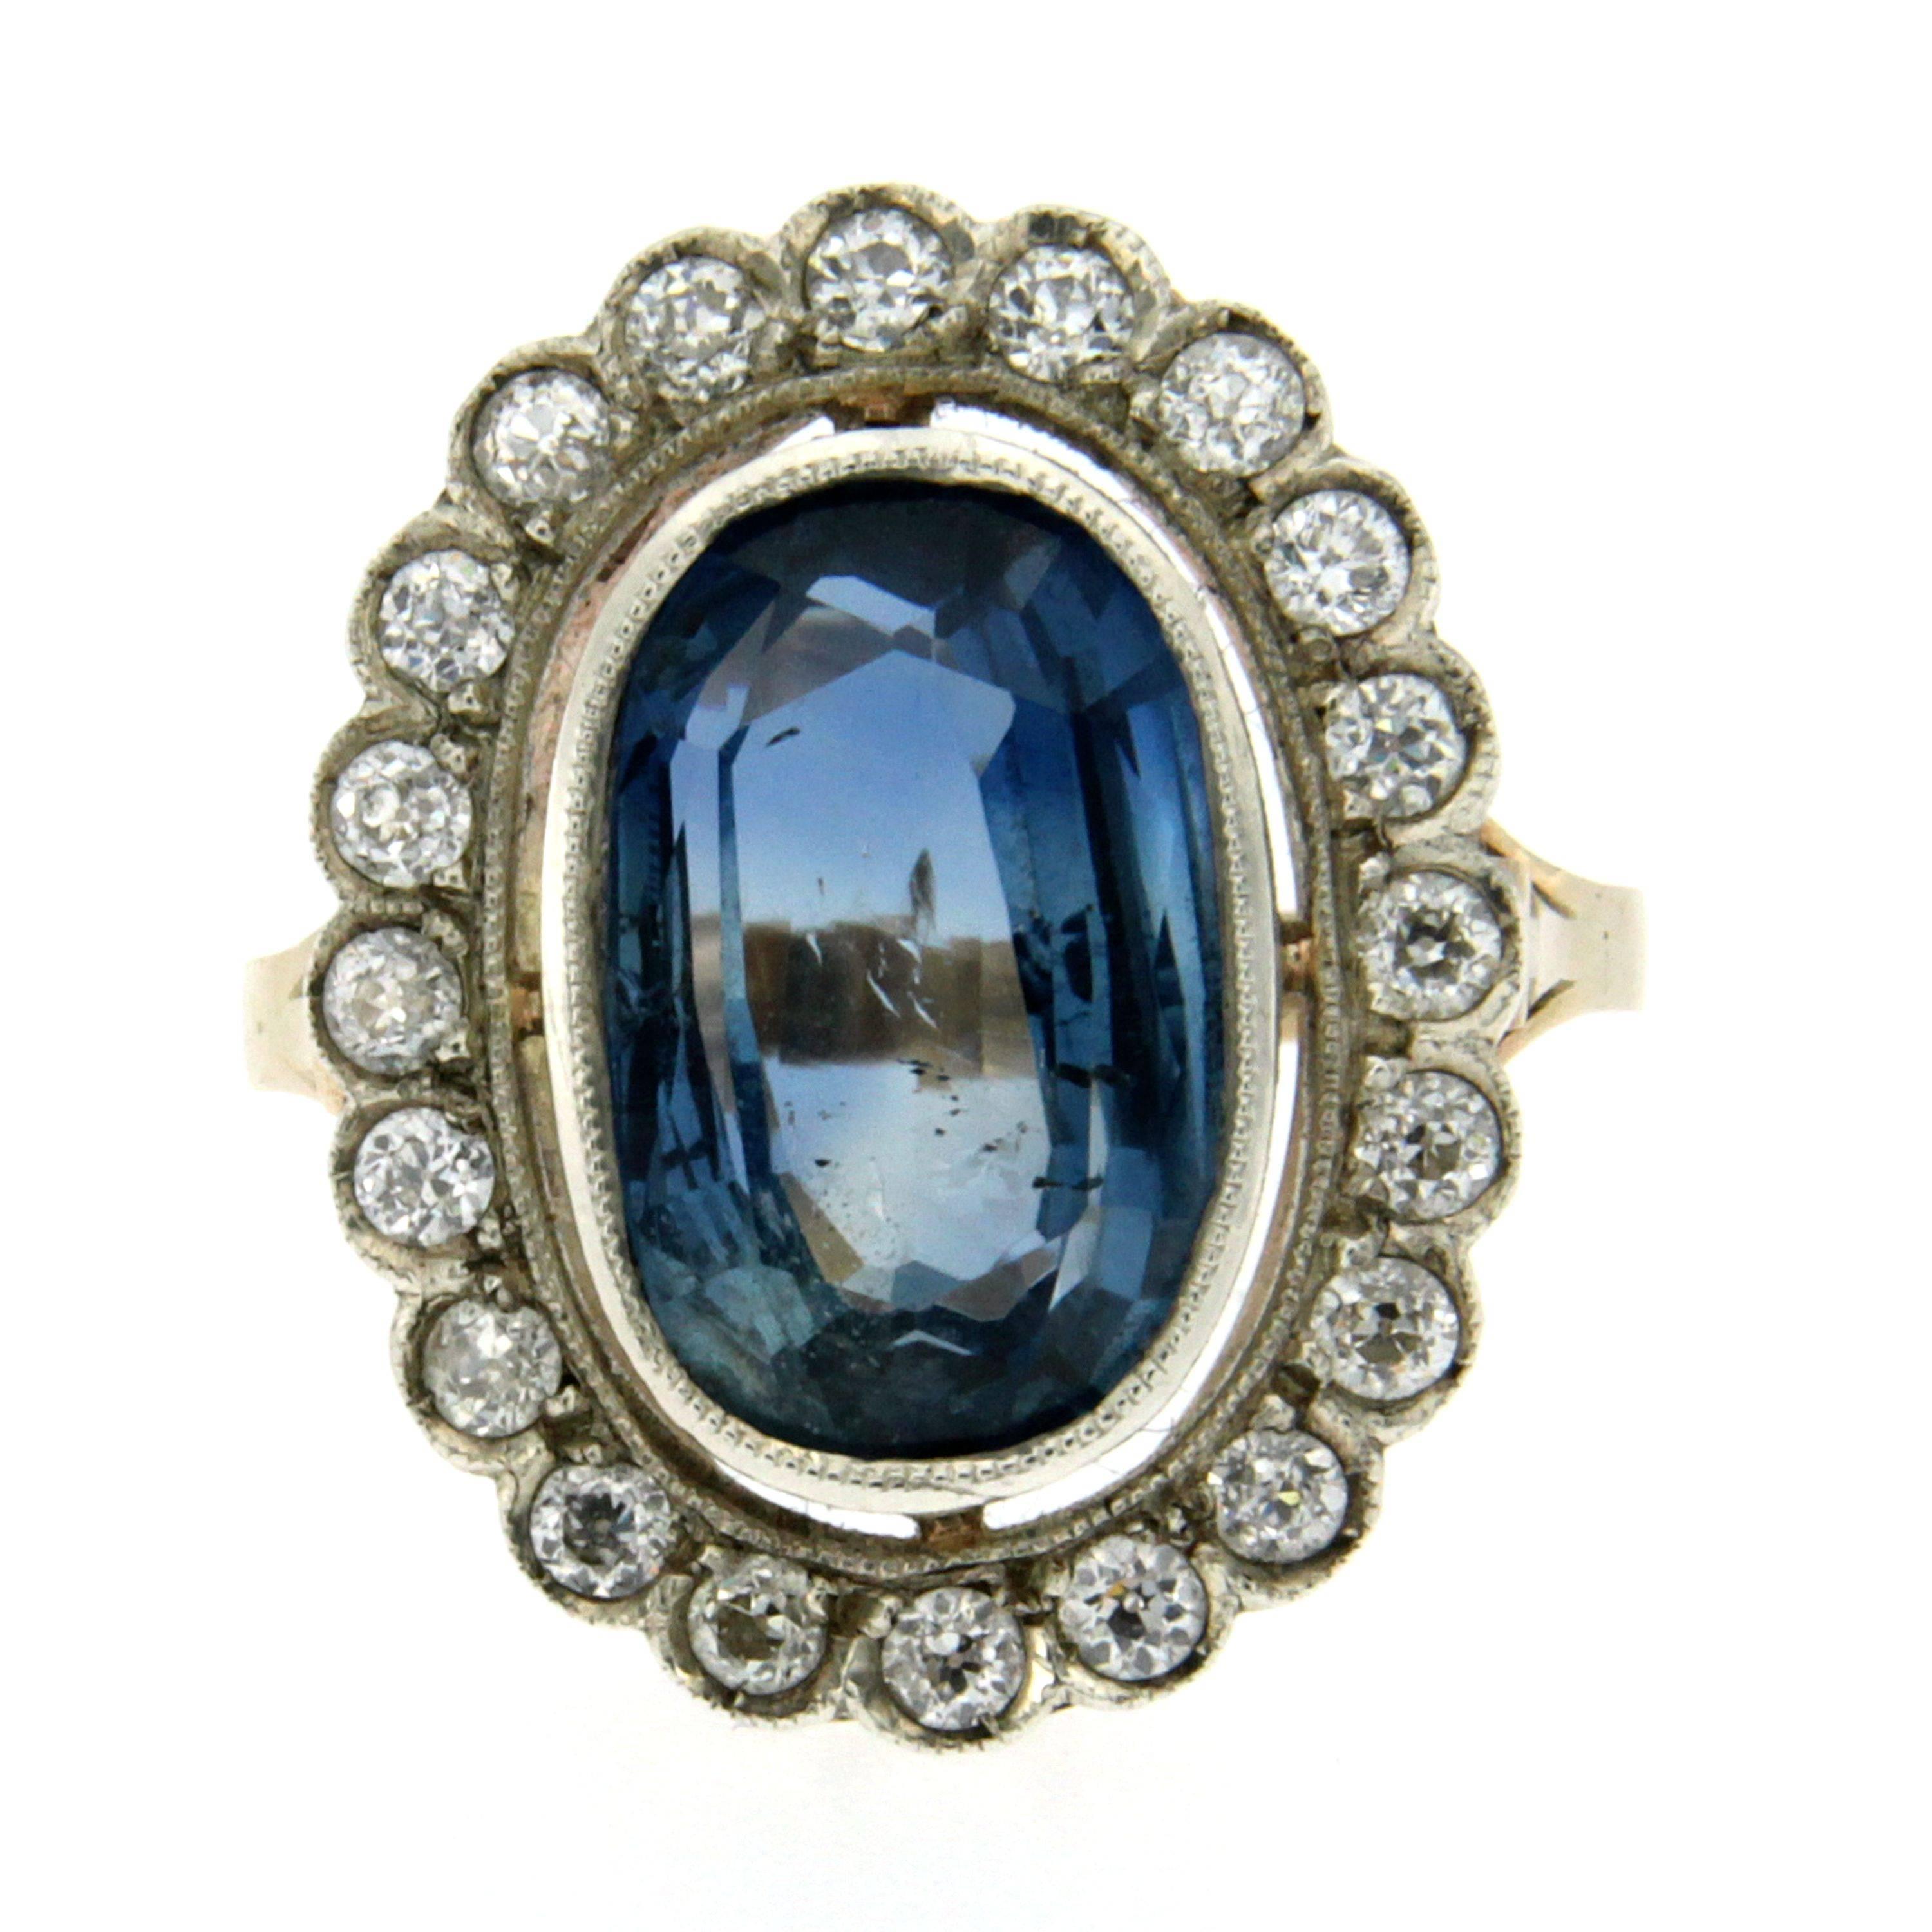 A classic Victorian piece from 1890s that features in the middle a wonderful and very large natural Sri Lanka Sapphire no Heat, GIA Cert. No 7182155022 of pleasant light and clarity surrounded by 20 old mine cut  diamonds graded I VVS2 for a total